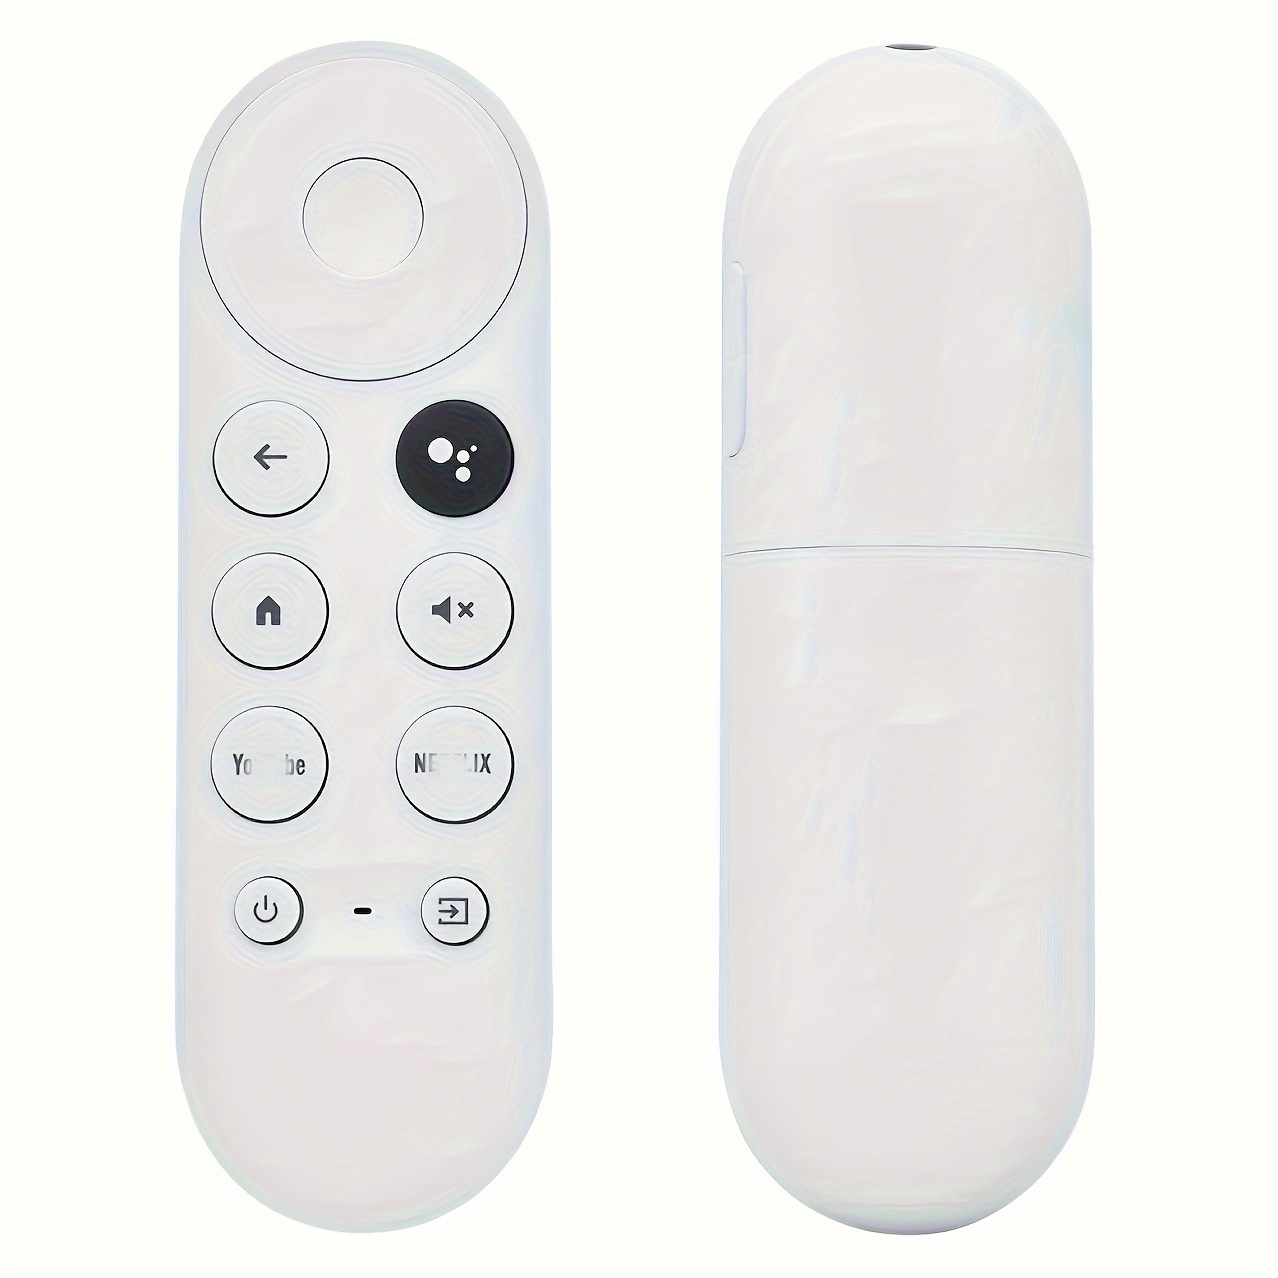 

G9n9n For Tv Voice Remote Control For Snow